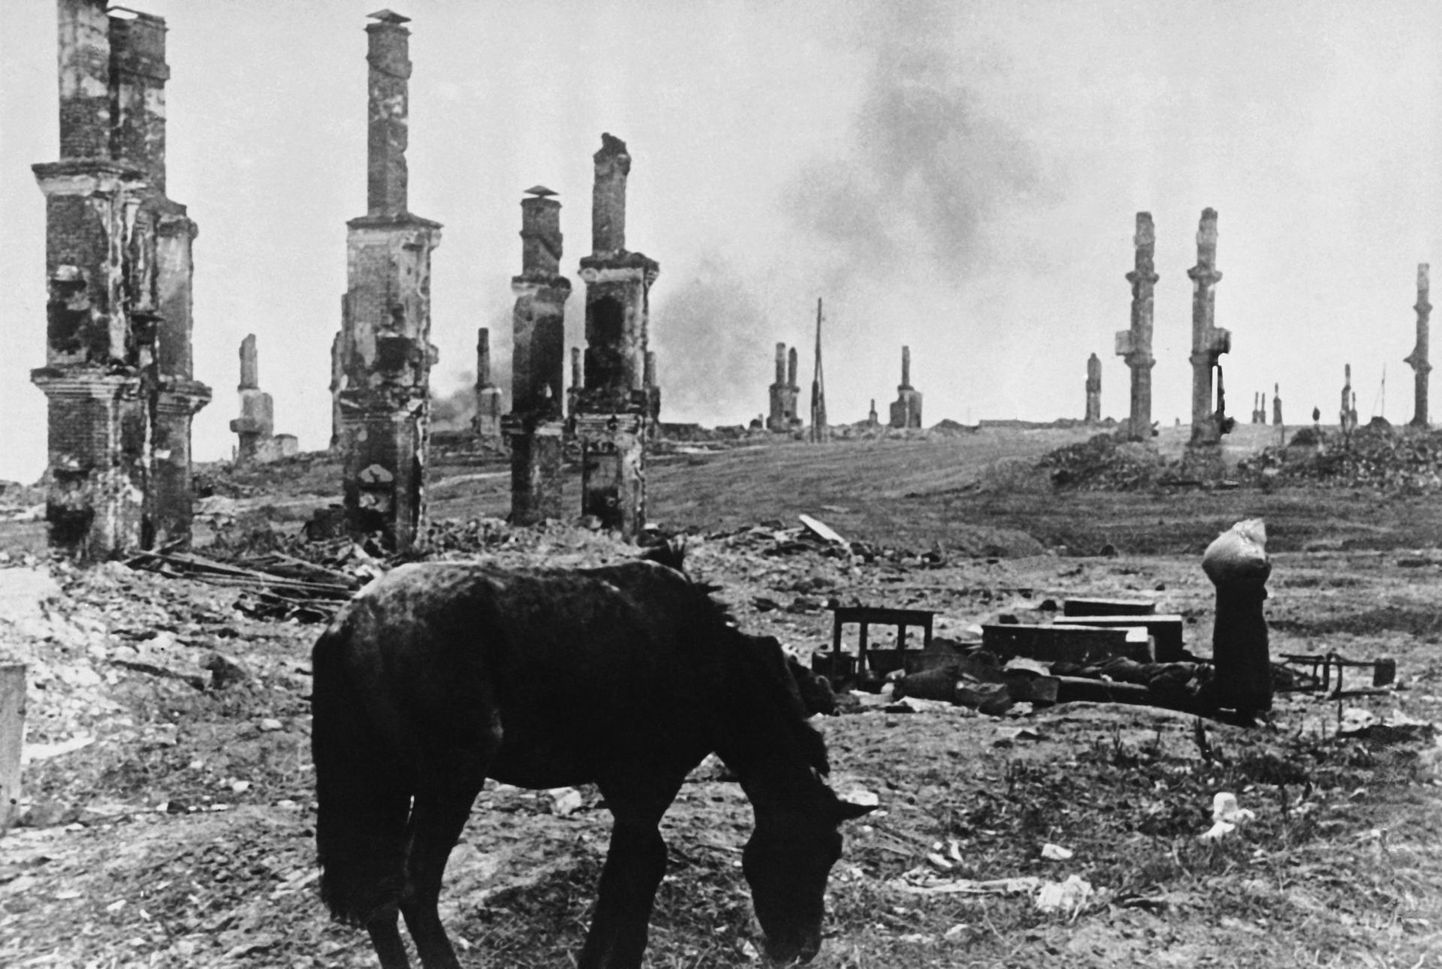 FILE - In this file photo taken on Dec. 18, 1942, an abandoned horse grazes among the ruins of the Russian city of Stalingrad, Russia, about four months into the battle for the city on the Volga River between Axis forces and the Soviet army. In the background, at right, Russian women leaving their battered homesteads make their way through the ruins. President Vladimir Putin has attended commemorations marking the 75th anniversary of Nazi surrender in the WWII battle of Stalingrad, lauding the Red Army&#39;s victory as a shining example of the nation&#39;s perseverance amid adversity. (AP Photo/Alvin Steinkopf, File)